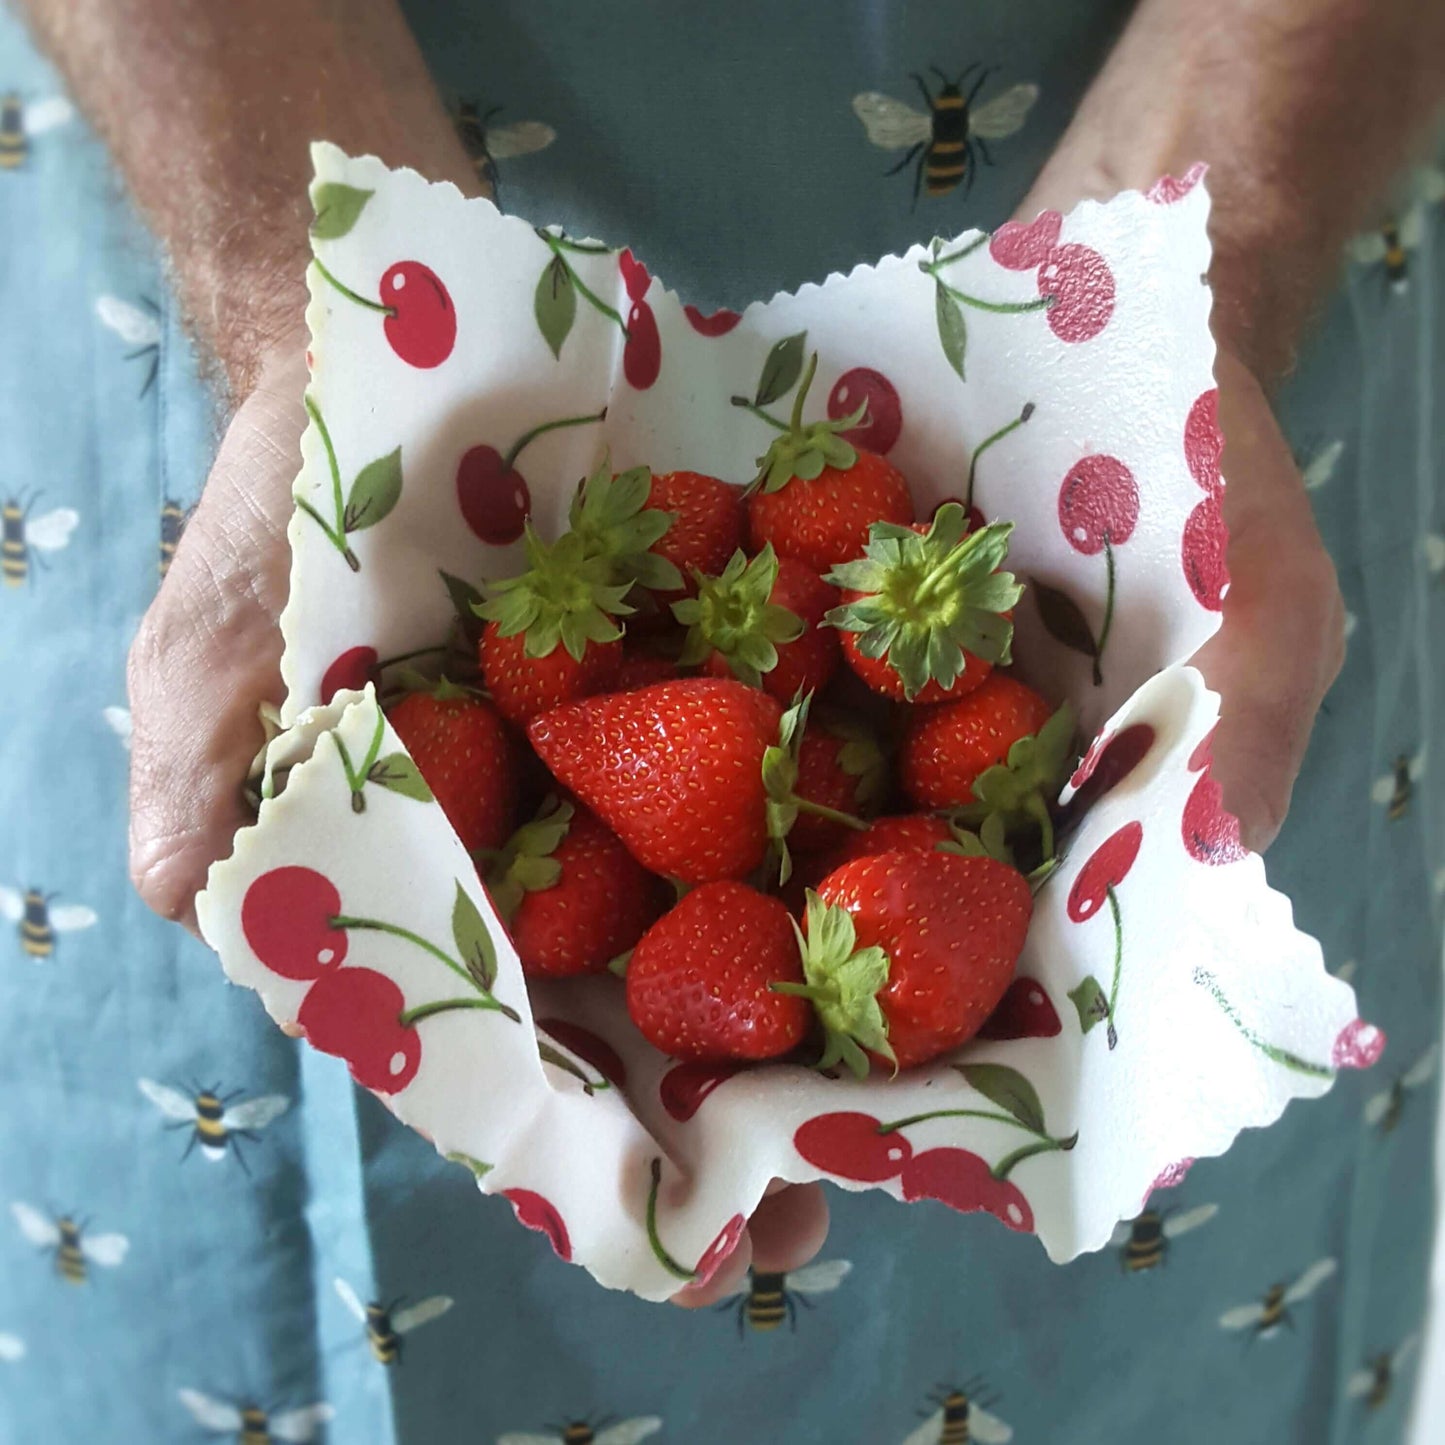 Reusable Beeswax Food Wraps 100% Hand Made in the UK by Honey Bee Good. Earth Kind Classic set of 3 in Cherries with strawberries